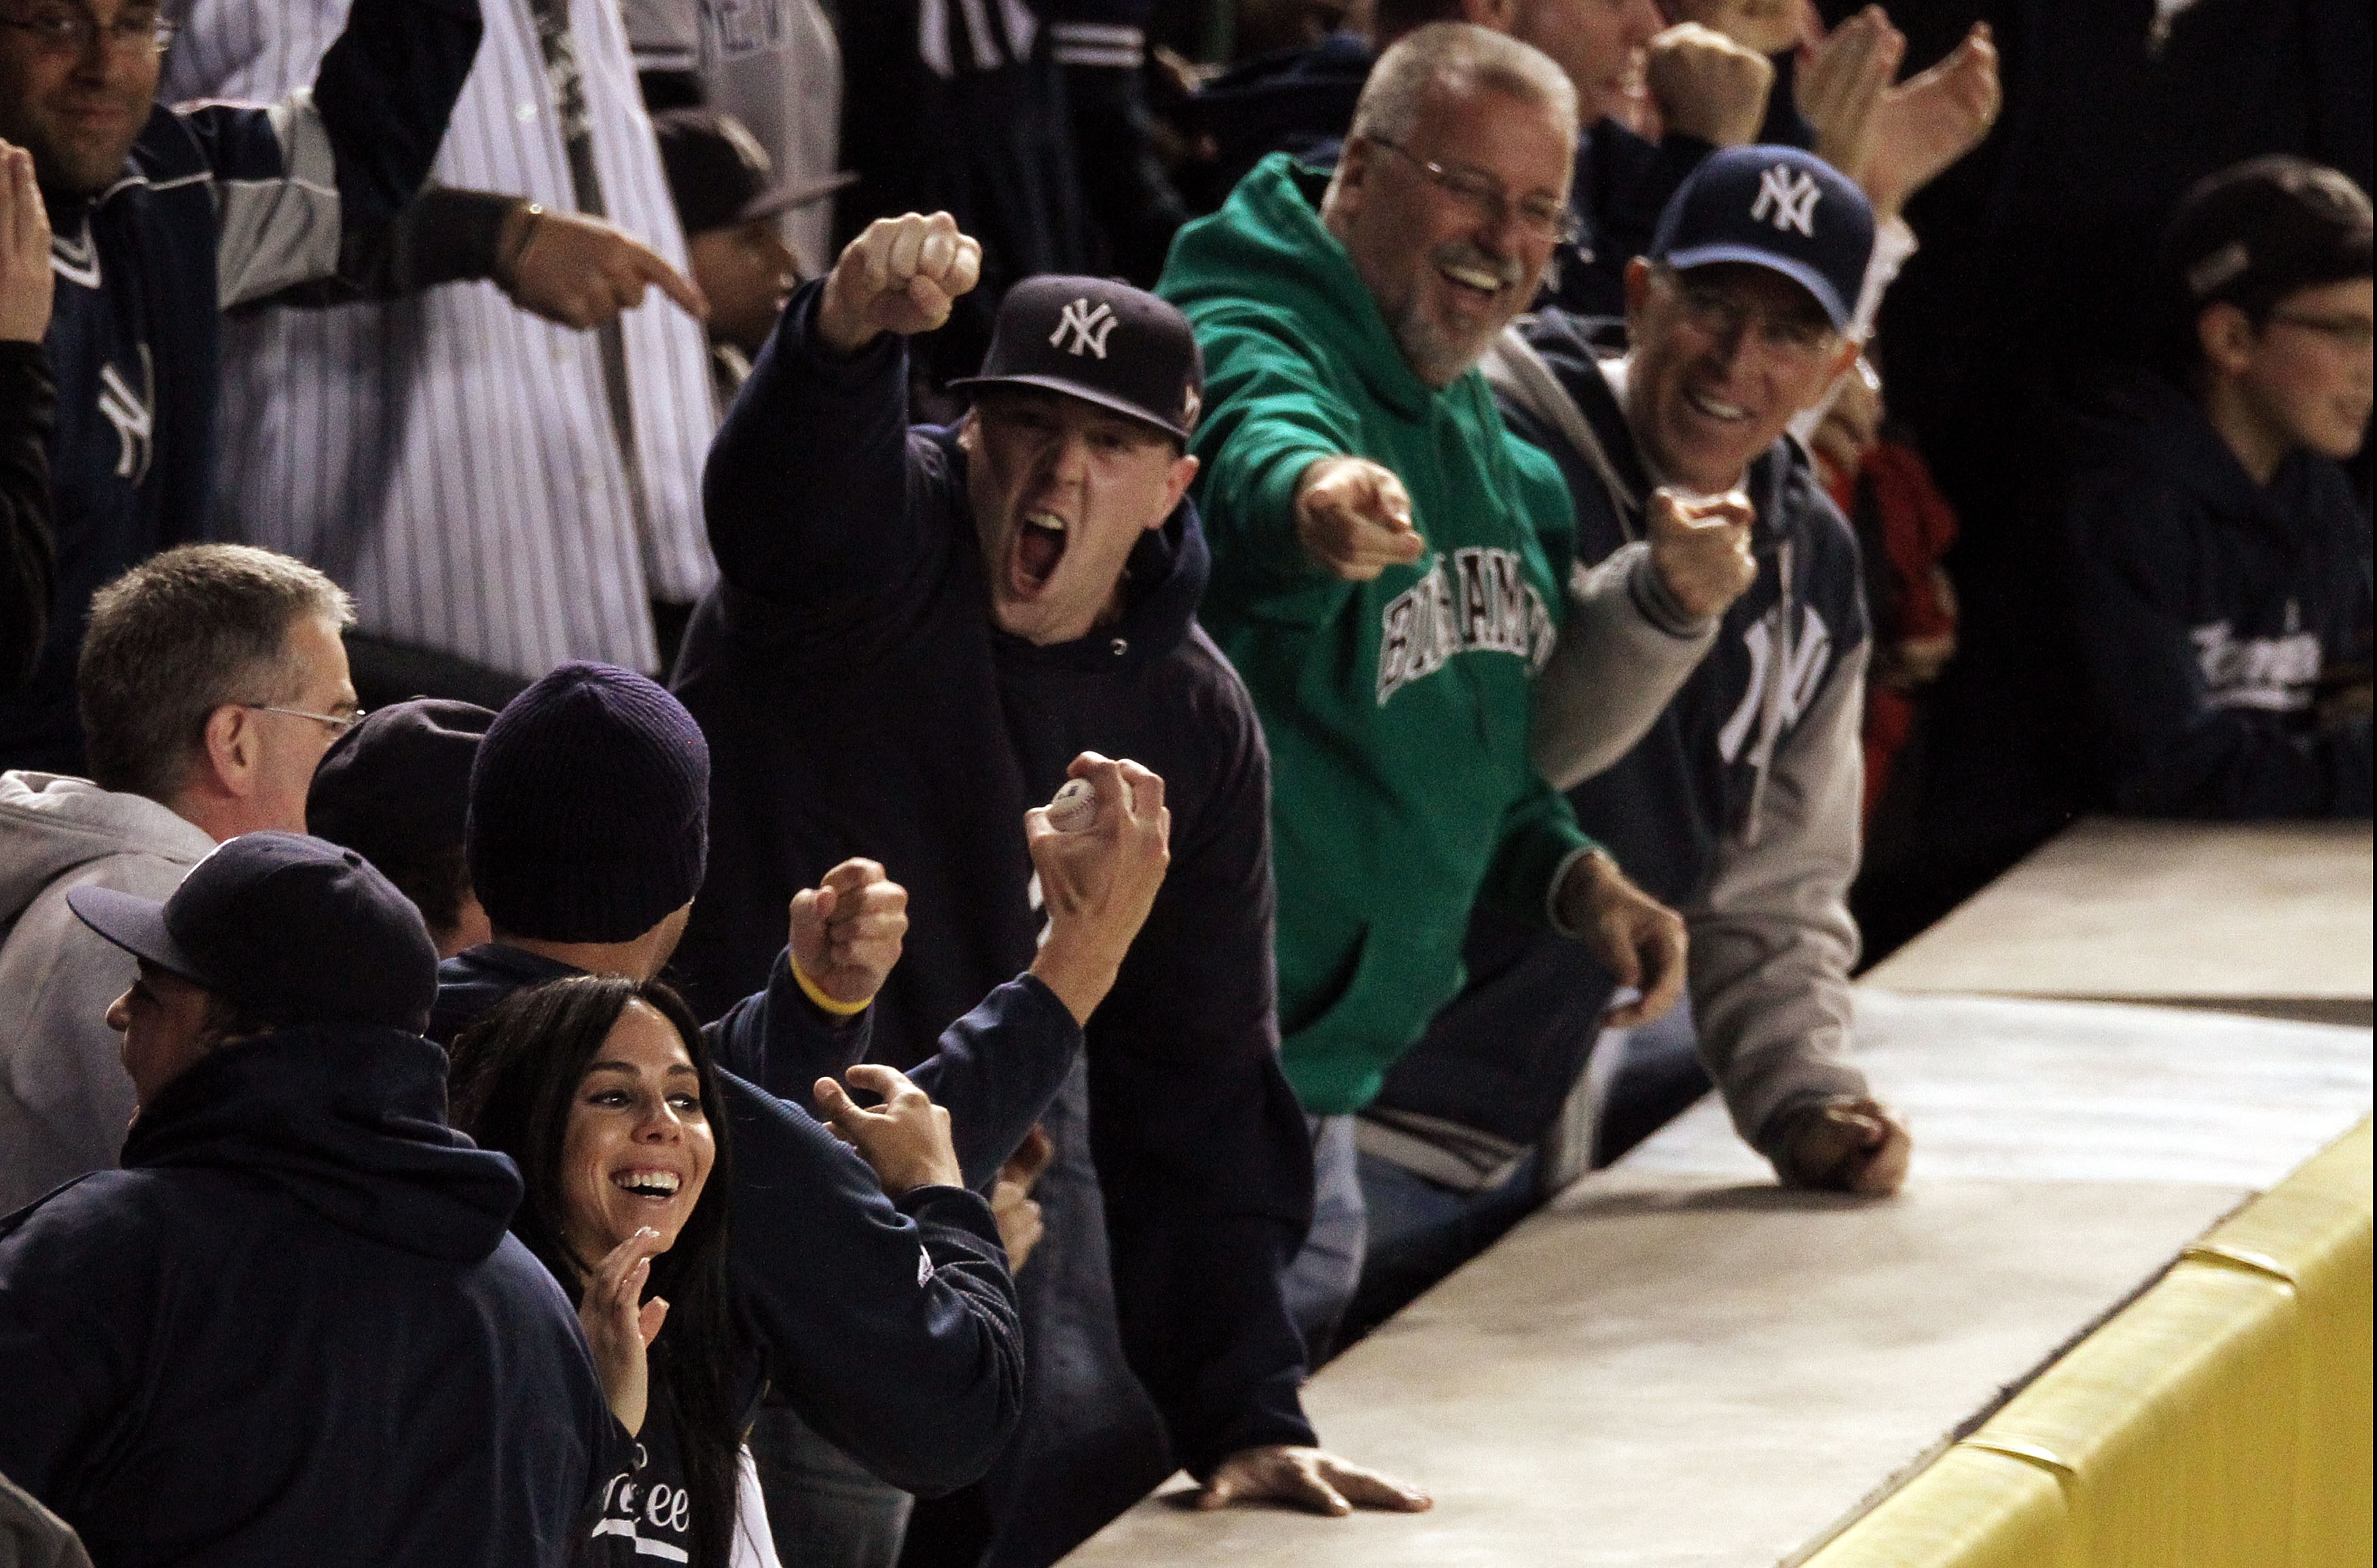 10 Reasons Rooting For The Yankees Isnt Fun